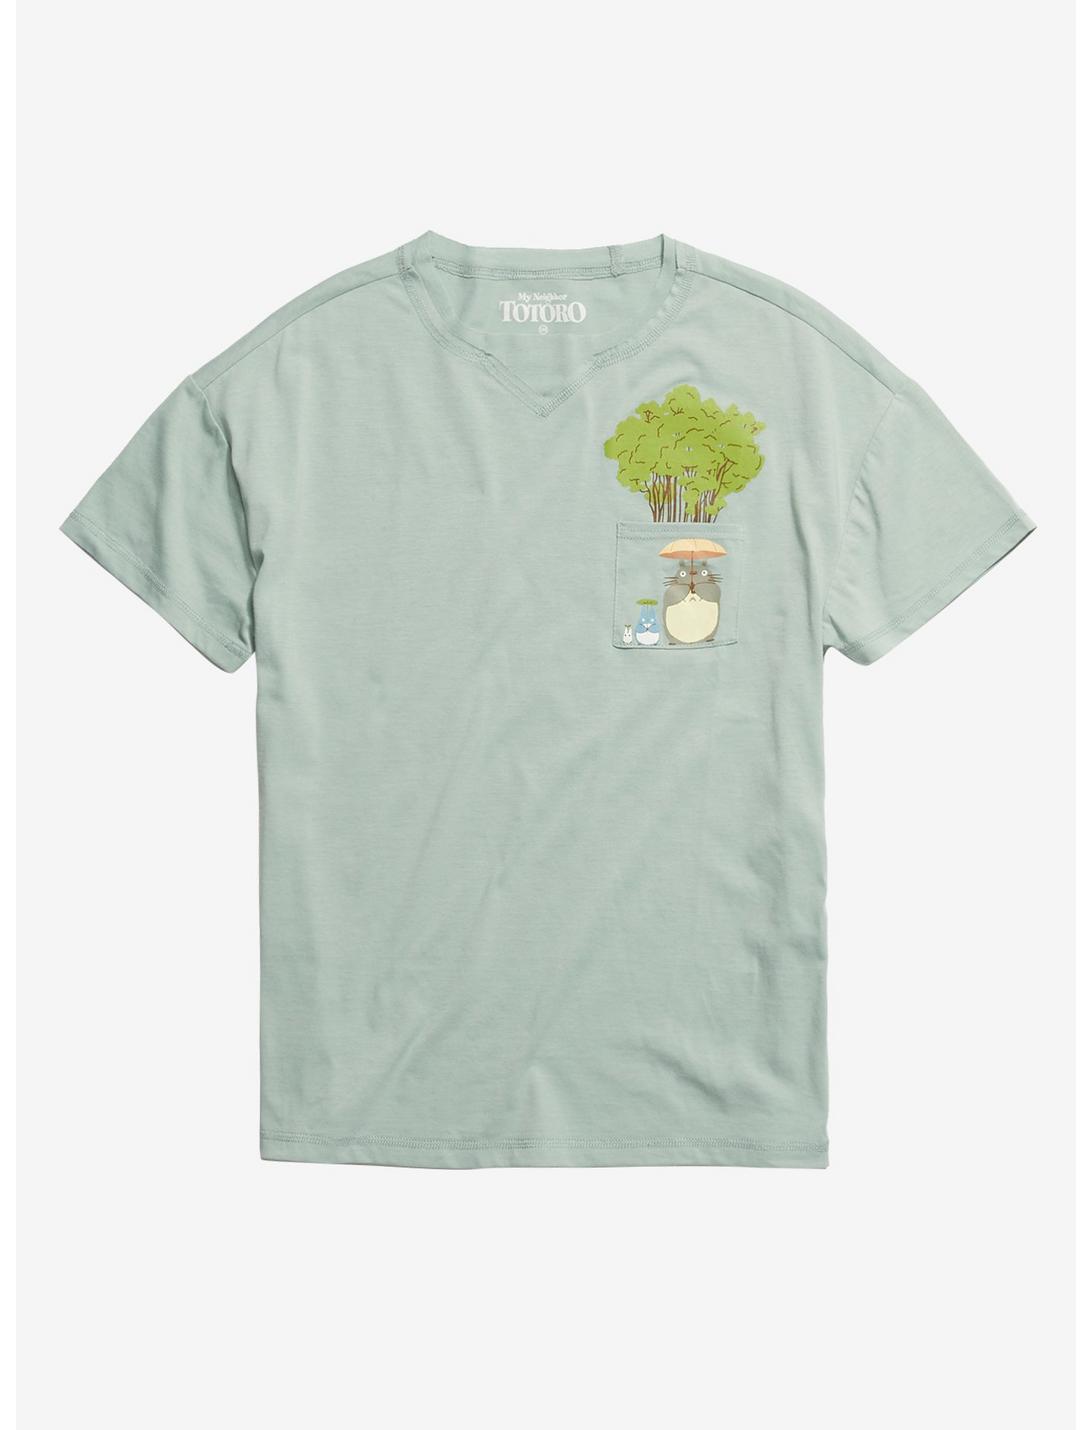 Her Universe Studio Ghibli Earth Day Collection My Neighbor Totoro Tree Pocket Girls T-Shirt Plus Size, MULTI, hi-res